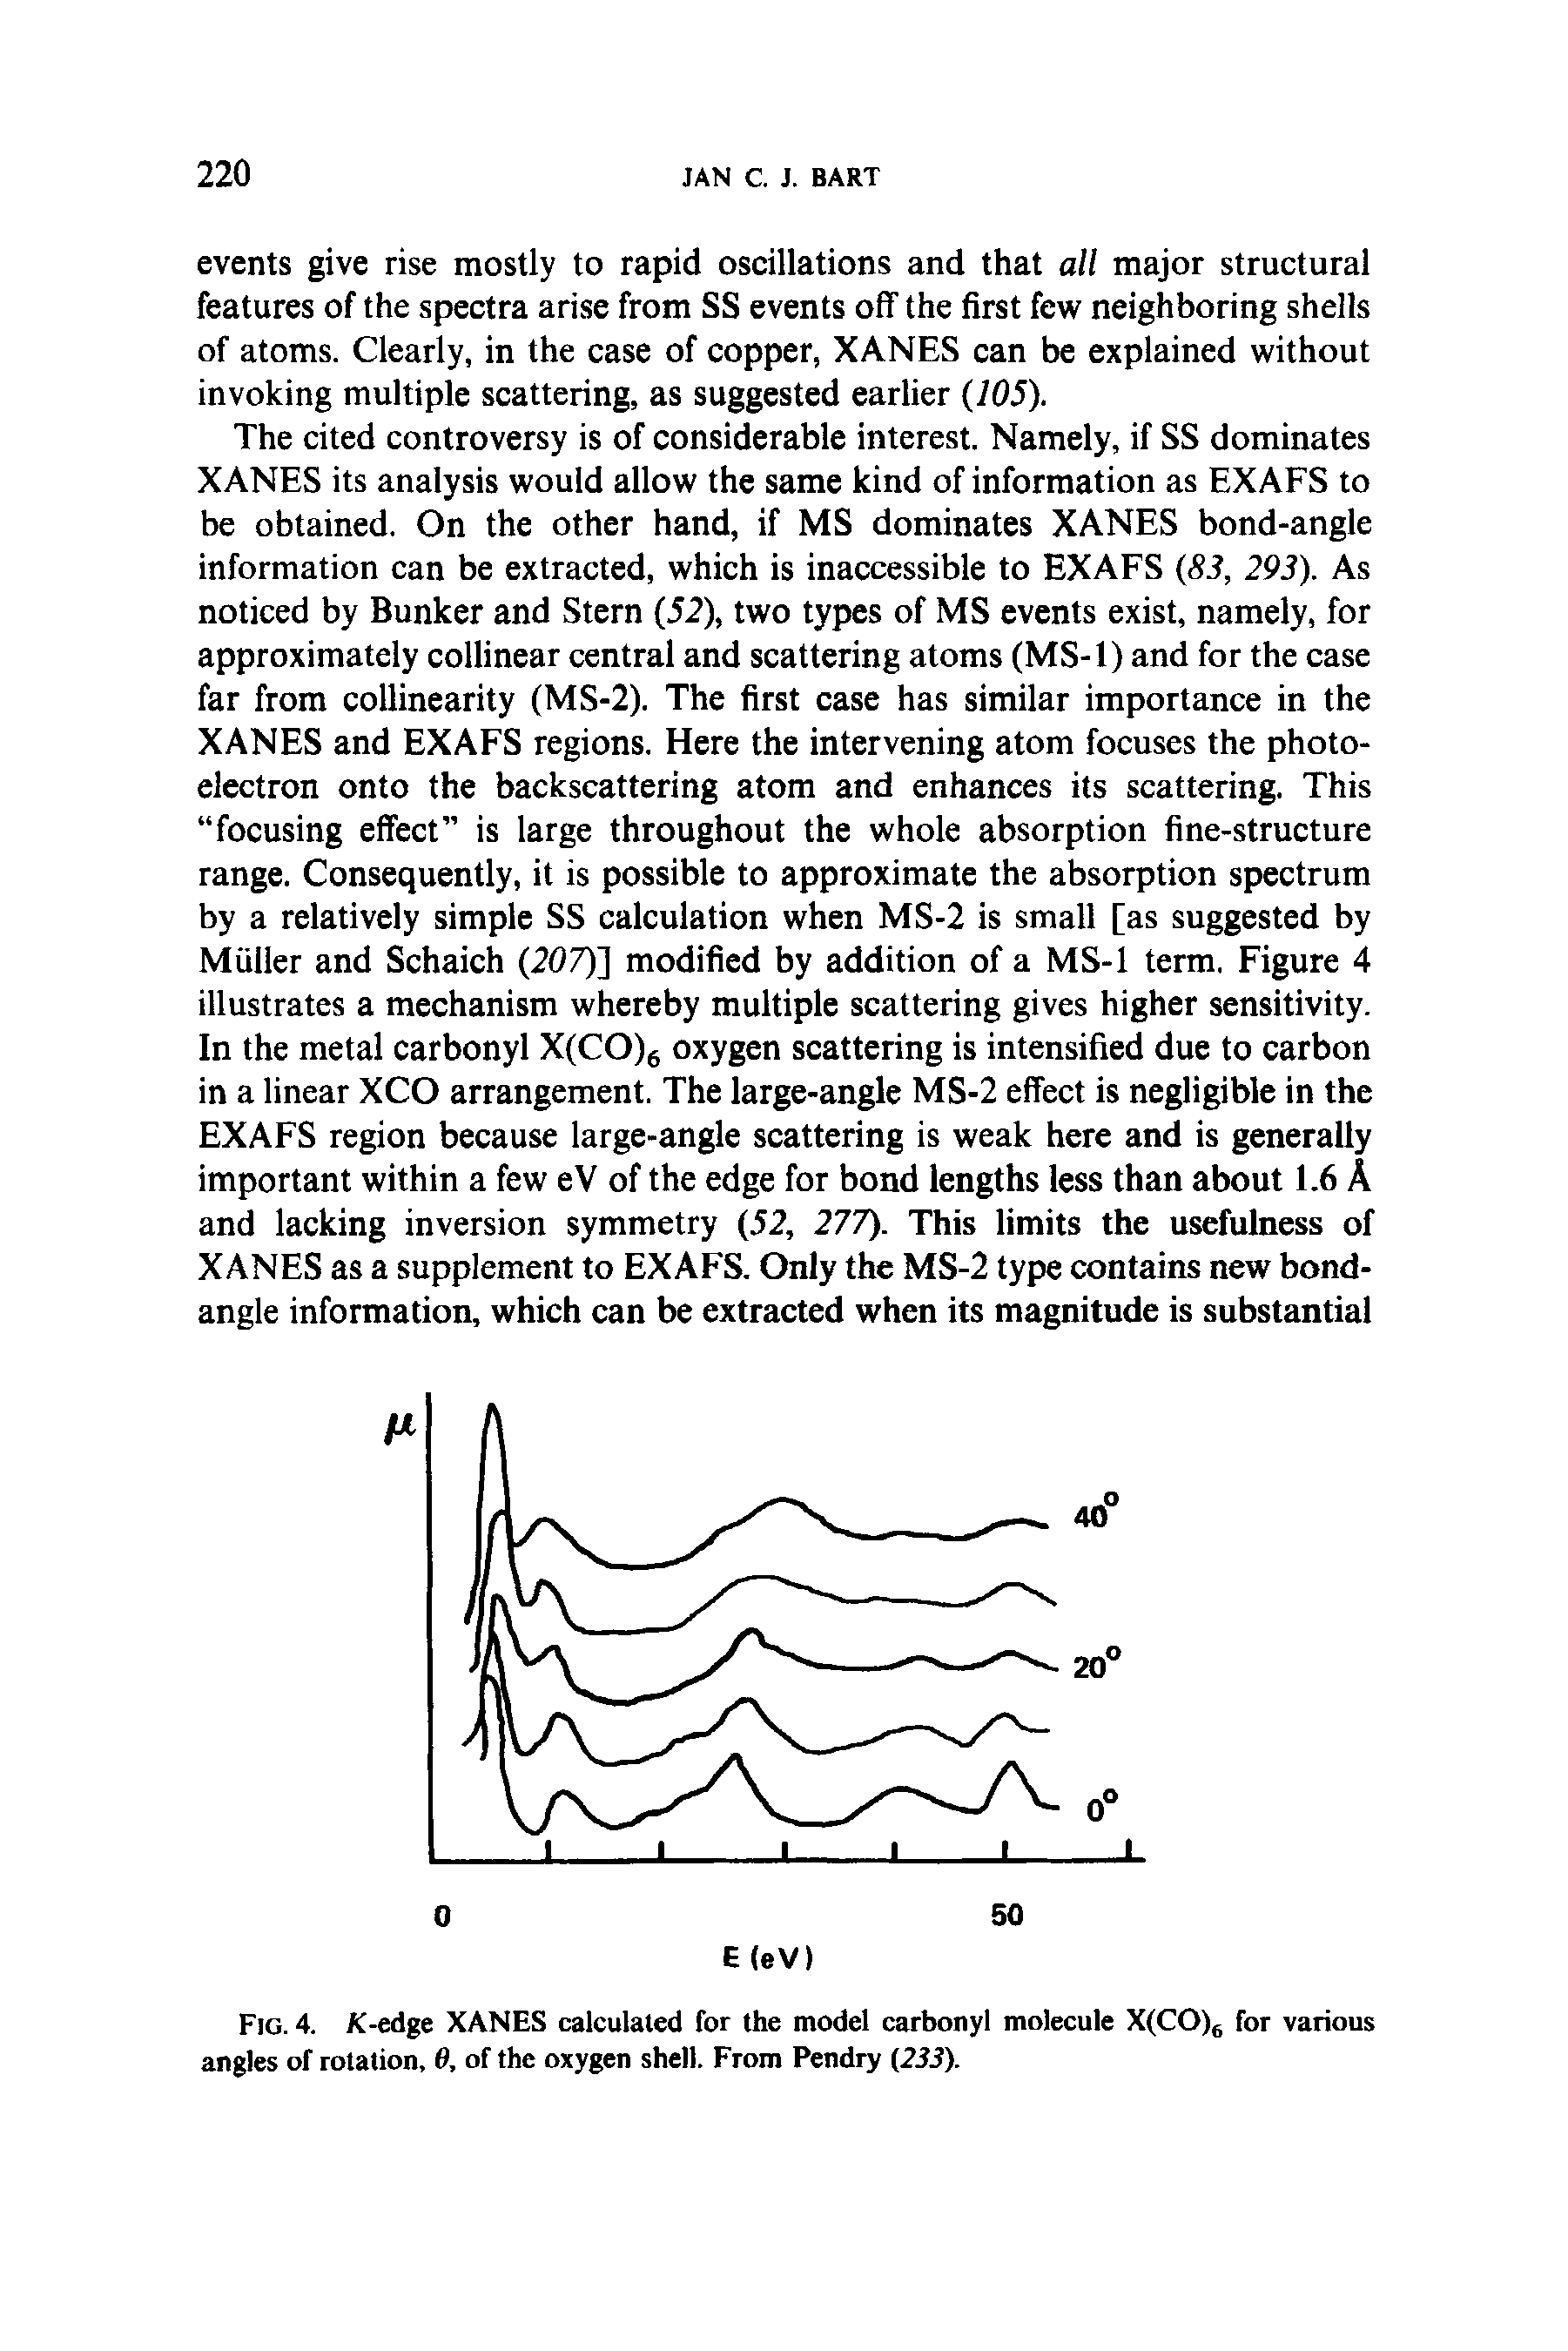 Fig. 4. K-edge XANES calculated for the model carbonyl molecule X(CO)6 for various angles of rotation, 0, of the oxygen shell. From Pendry (233).